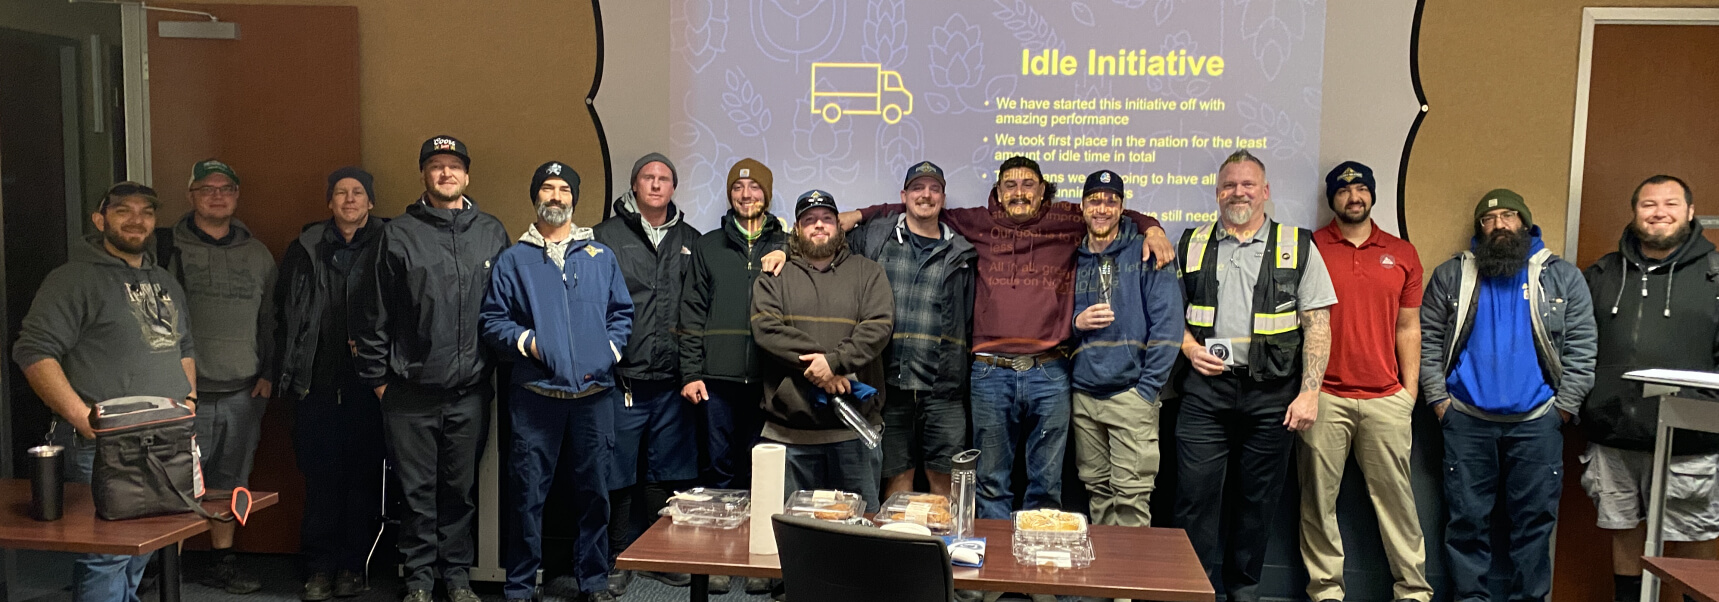 Redding team posing for picture in front of Idle Initiative slide being projected on the wall